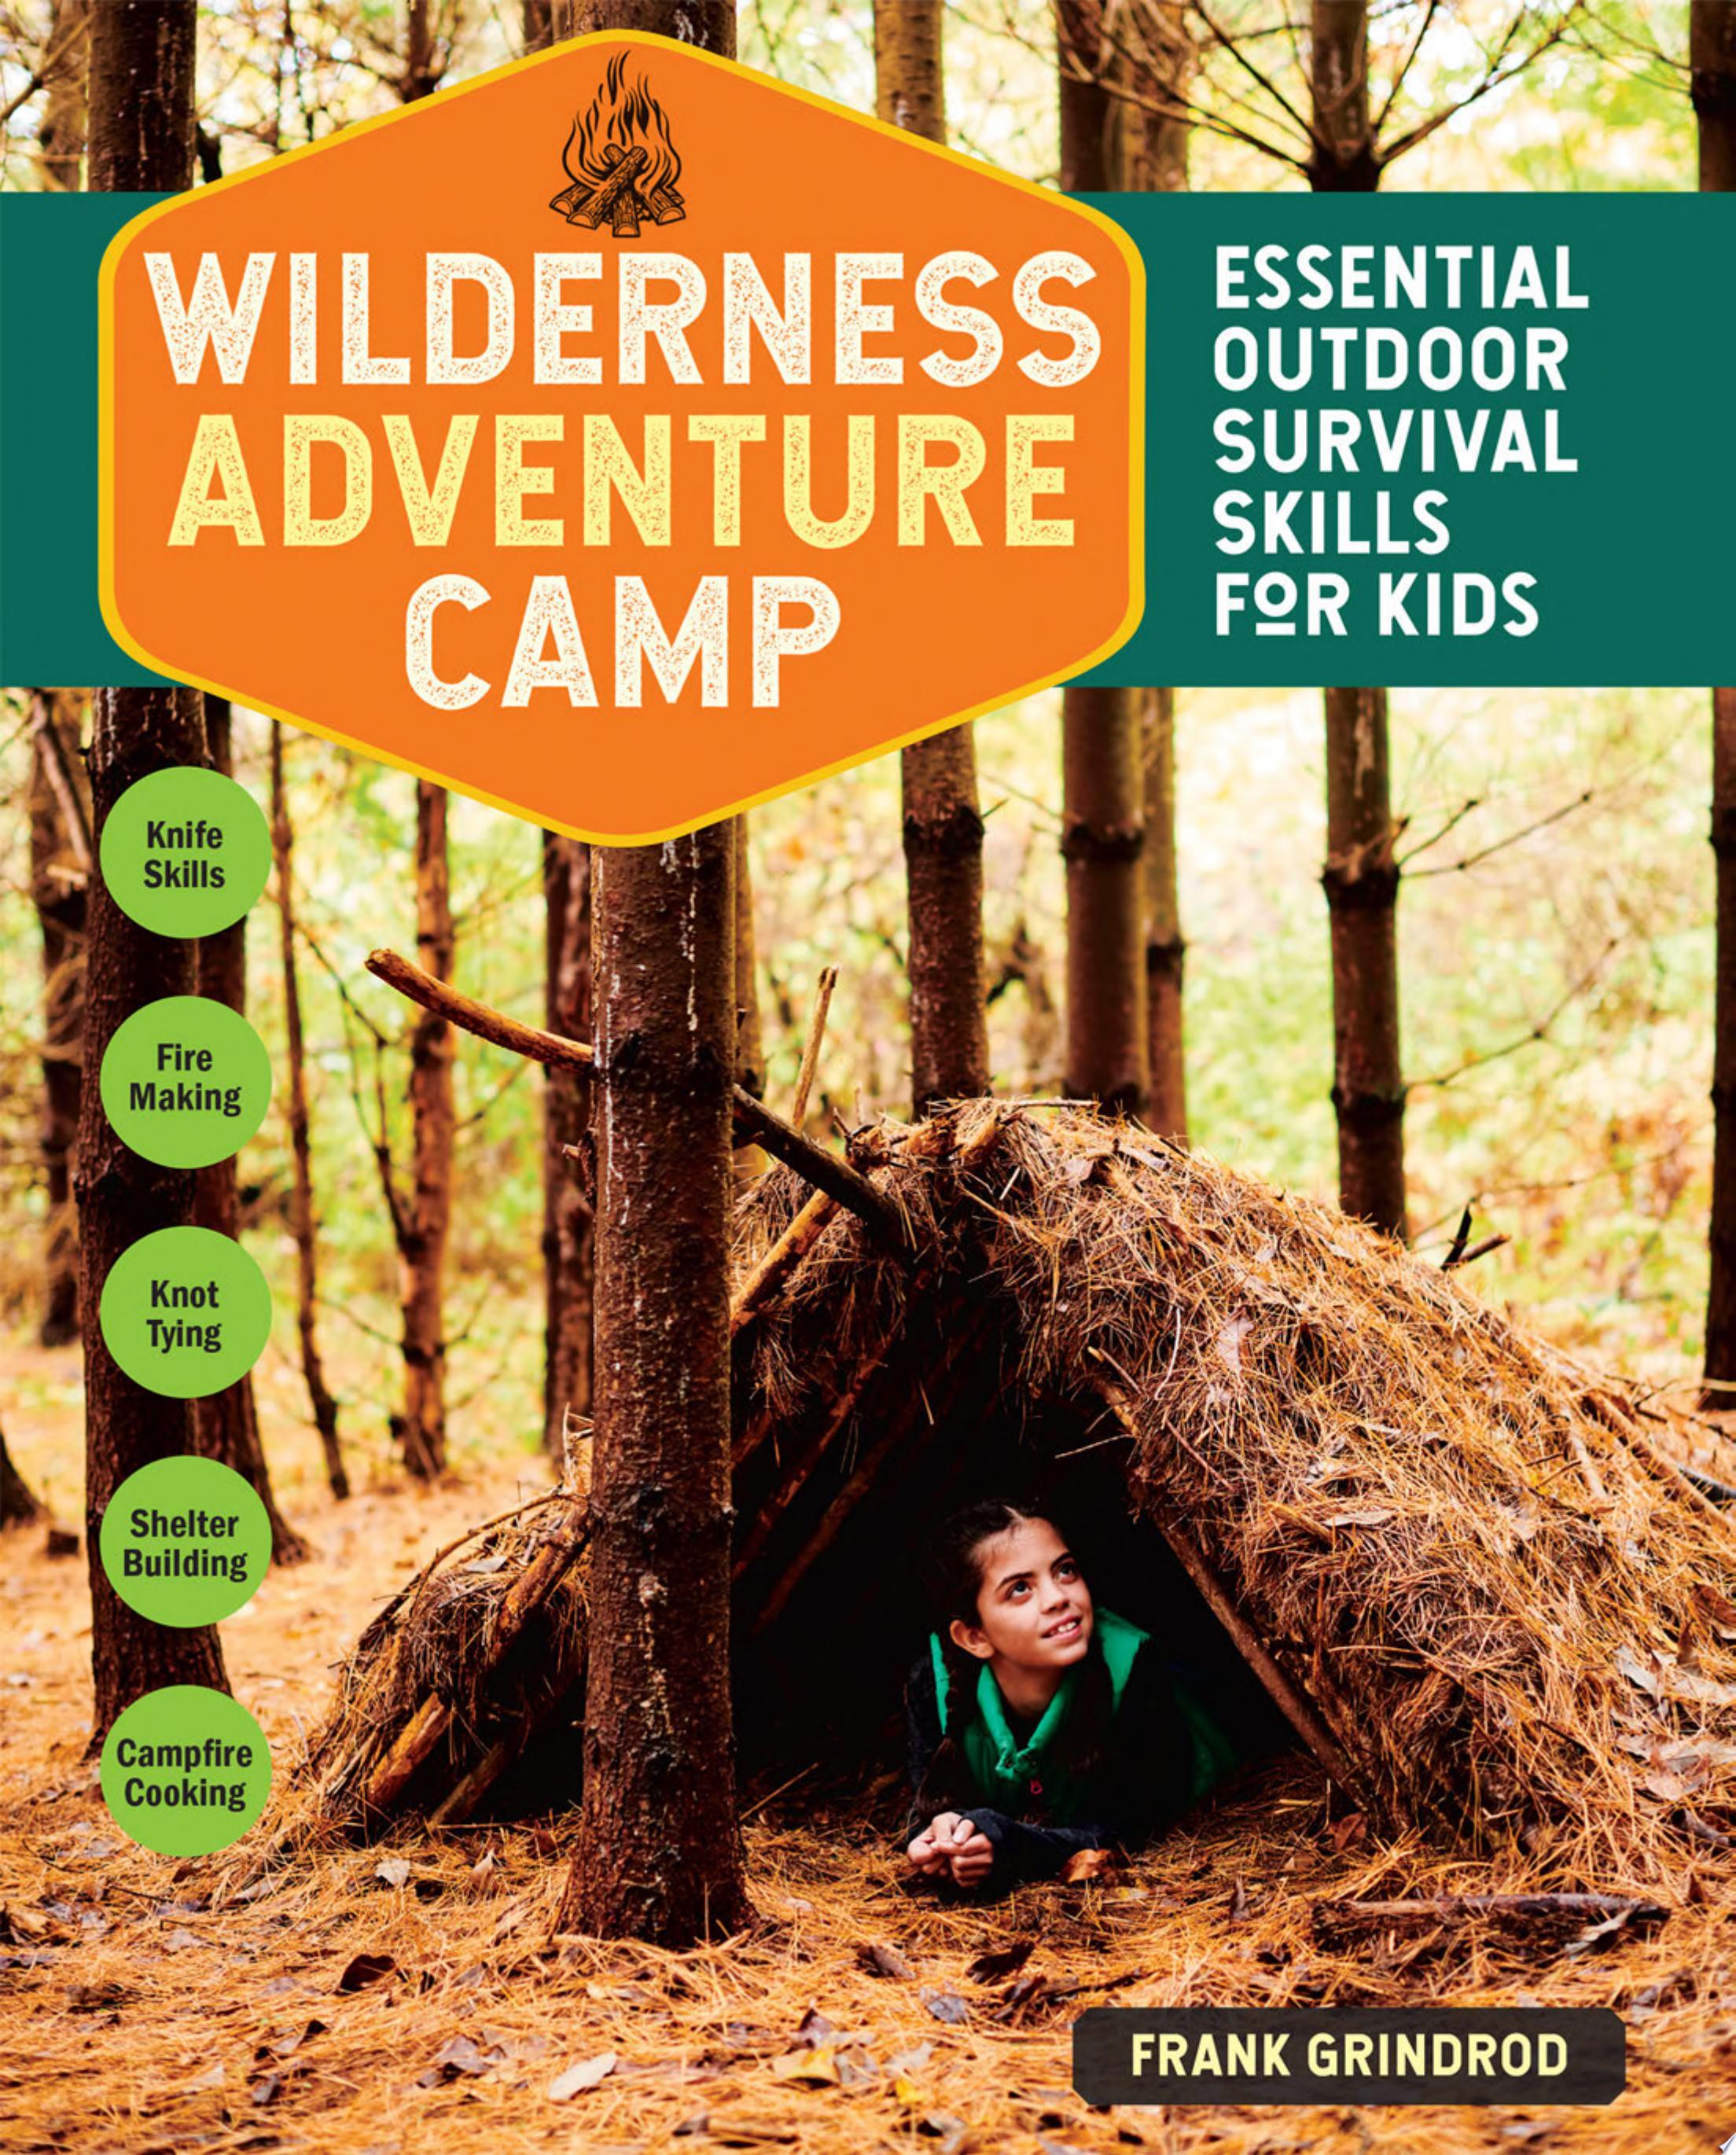 Image for "Wilderness Adventure Camp"